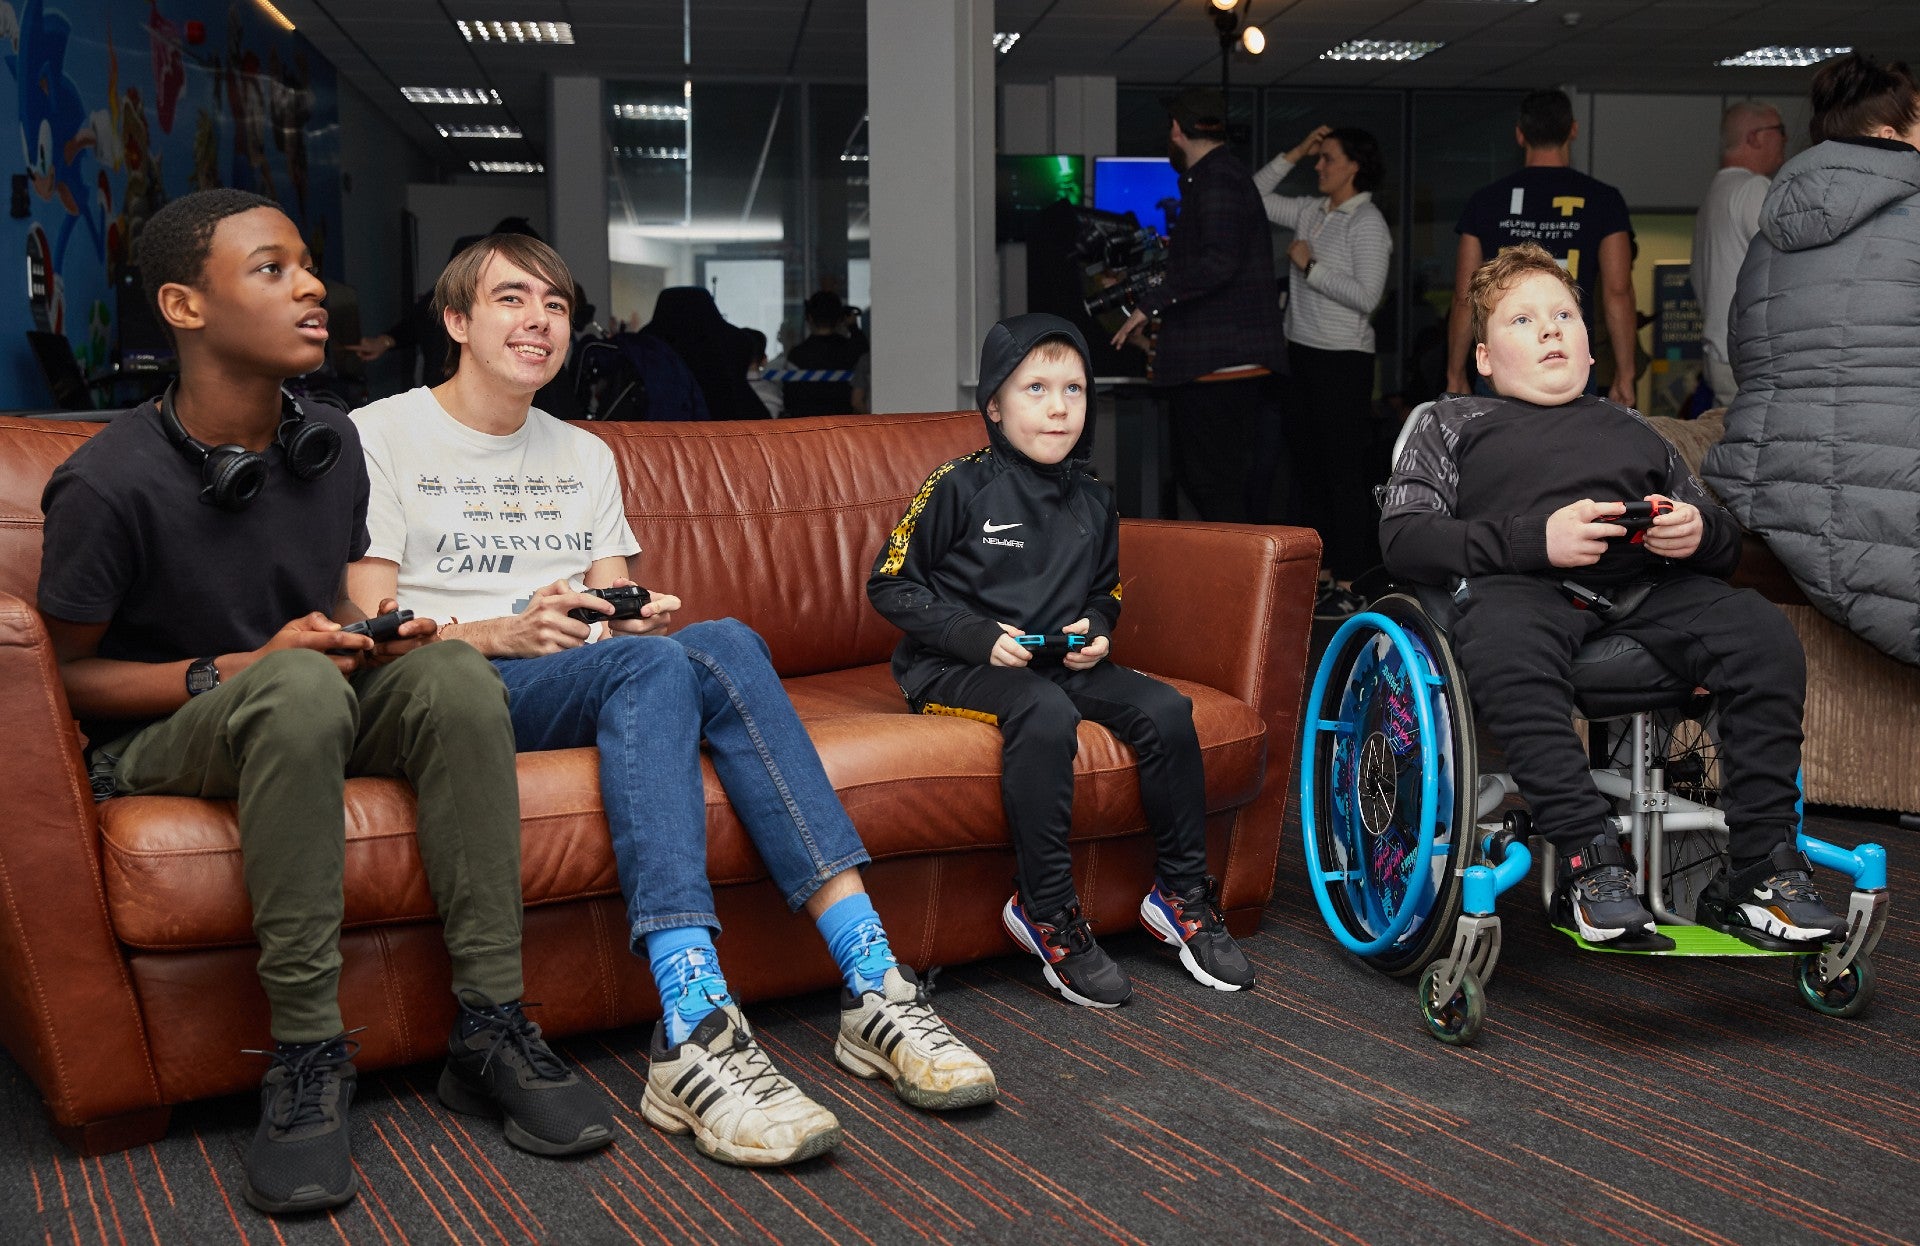 Image for Everyone Can: The UK charity helping disabled people to play games